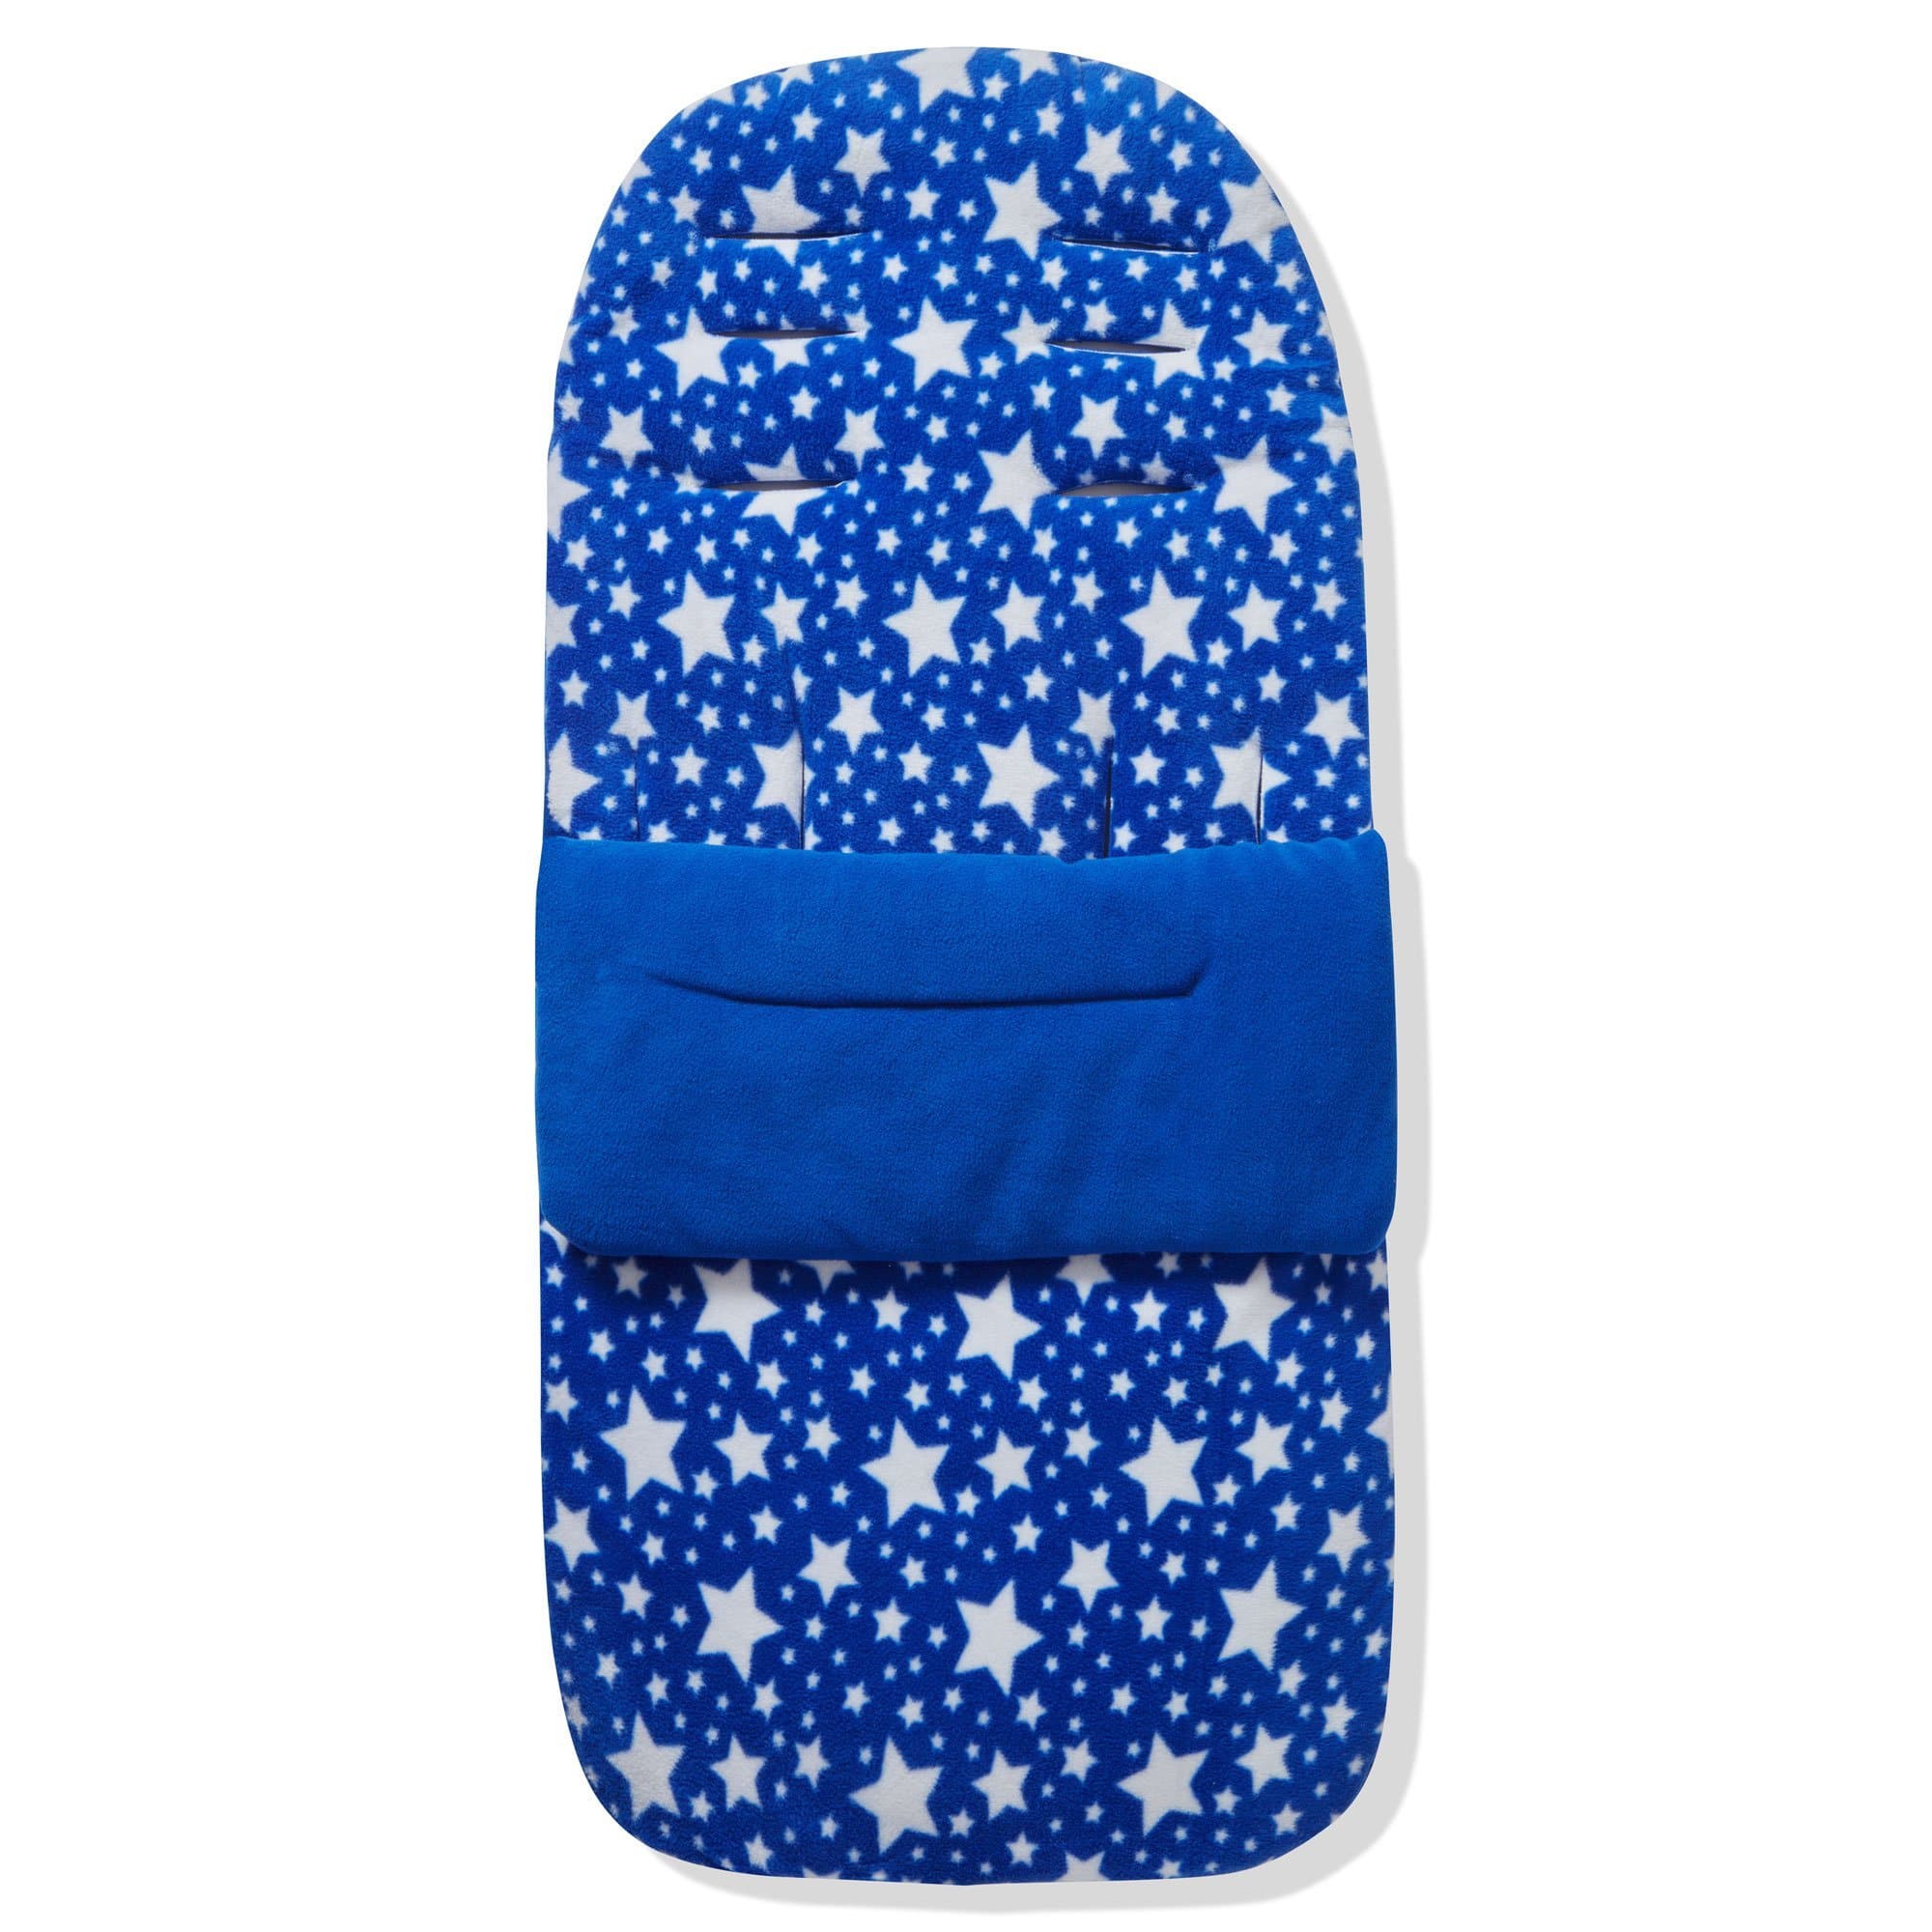 Fleece Footmuff / Cosy Toes Compatible With Chicco - For Your Little One